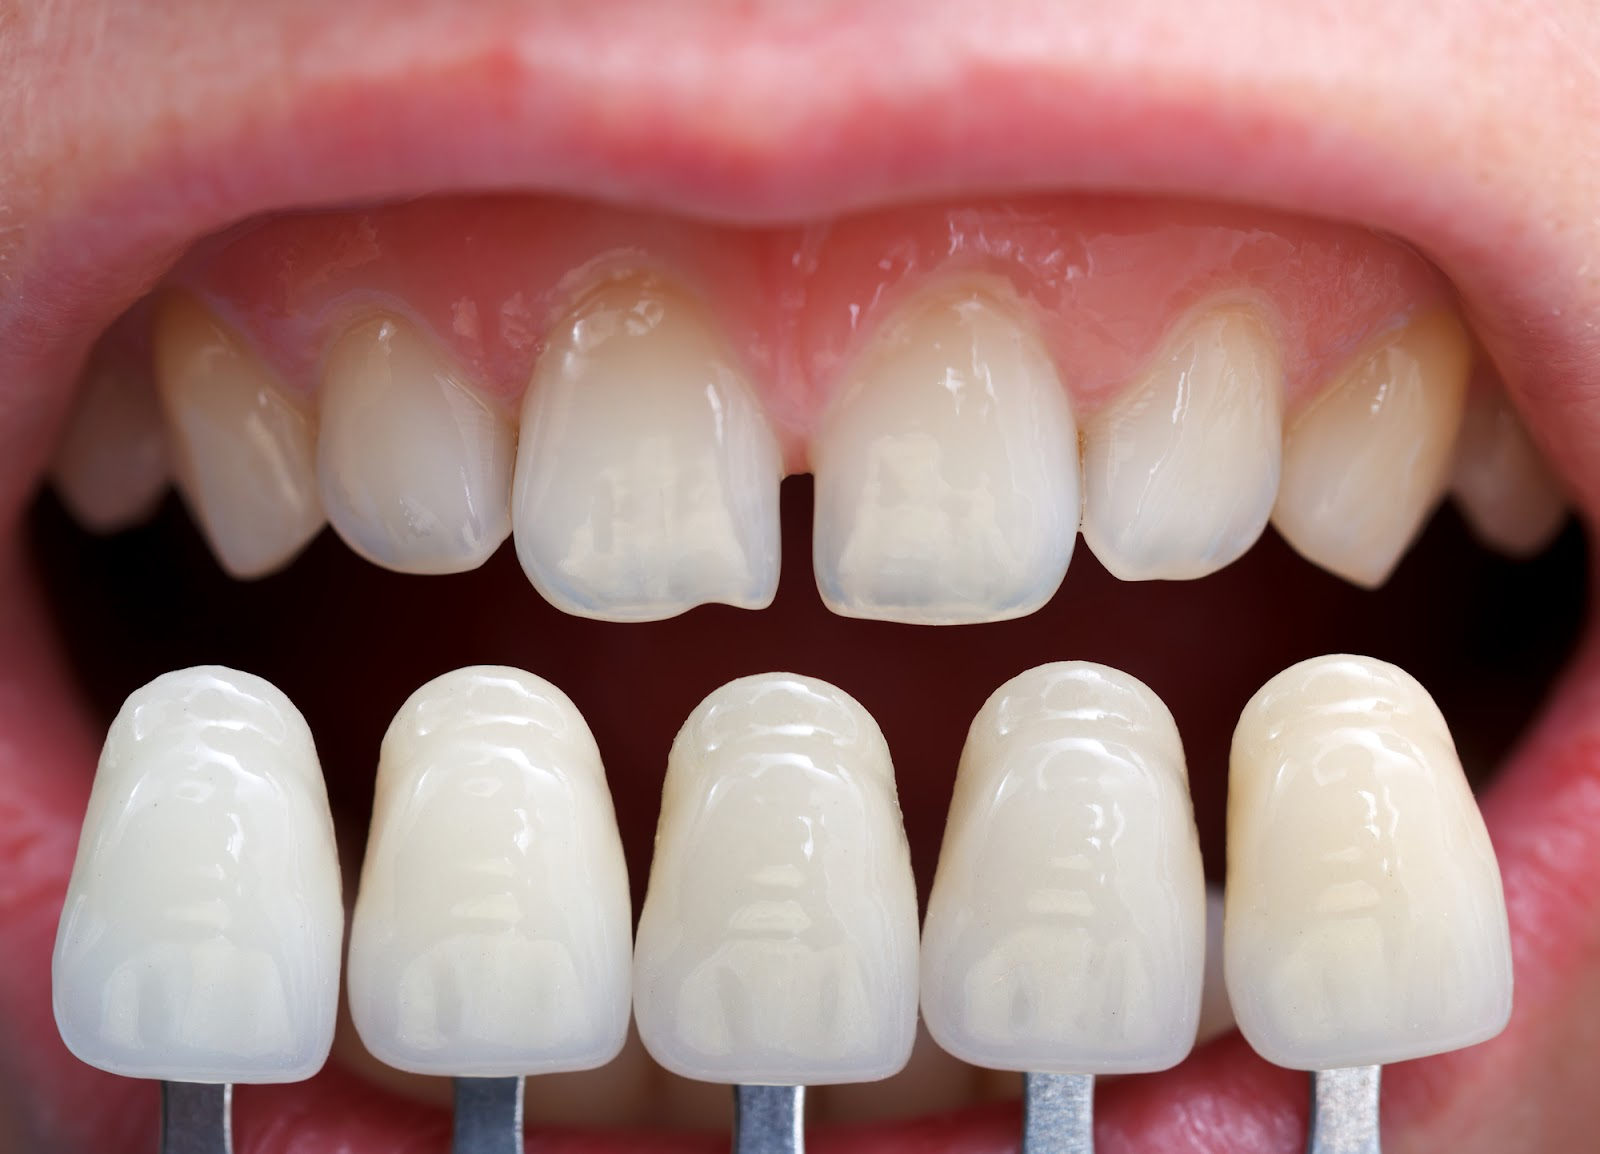 Are veneers right for you? Take this 2-minute quiz to find out!